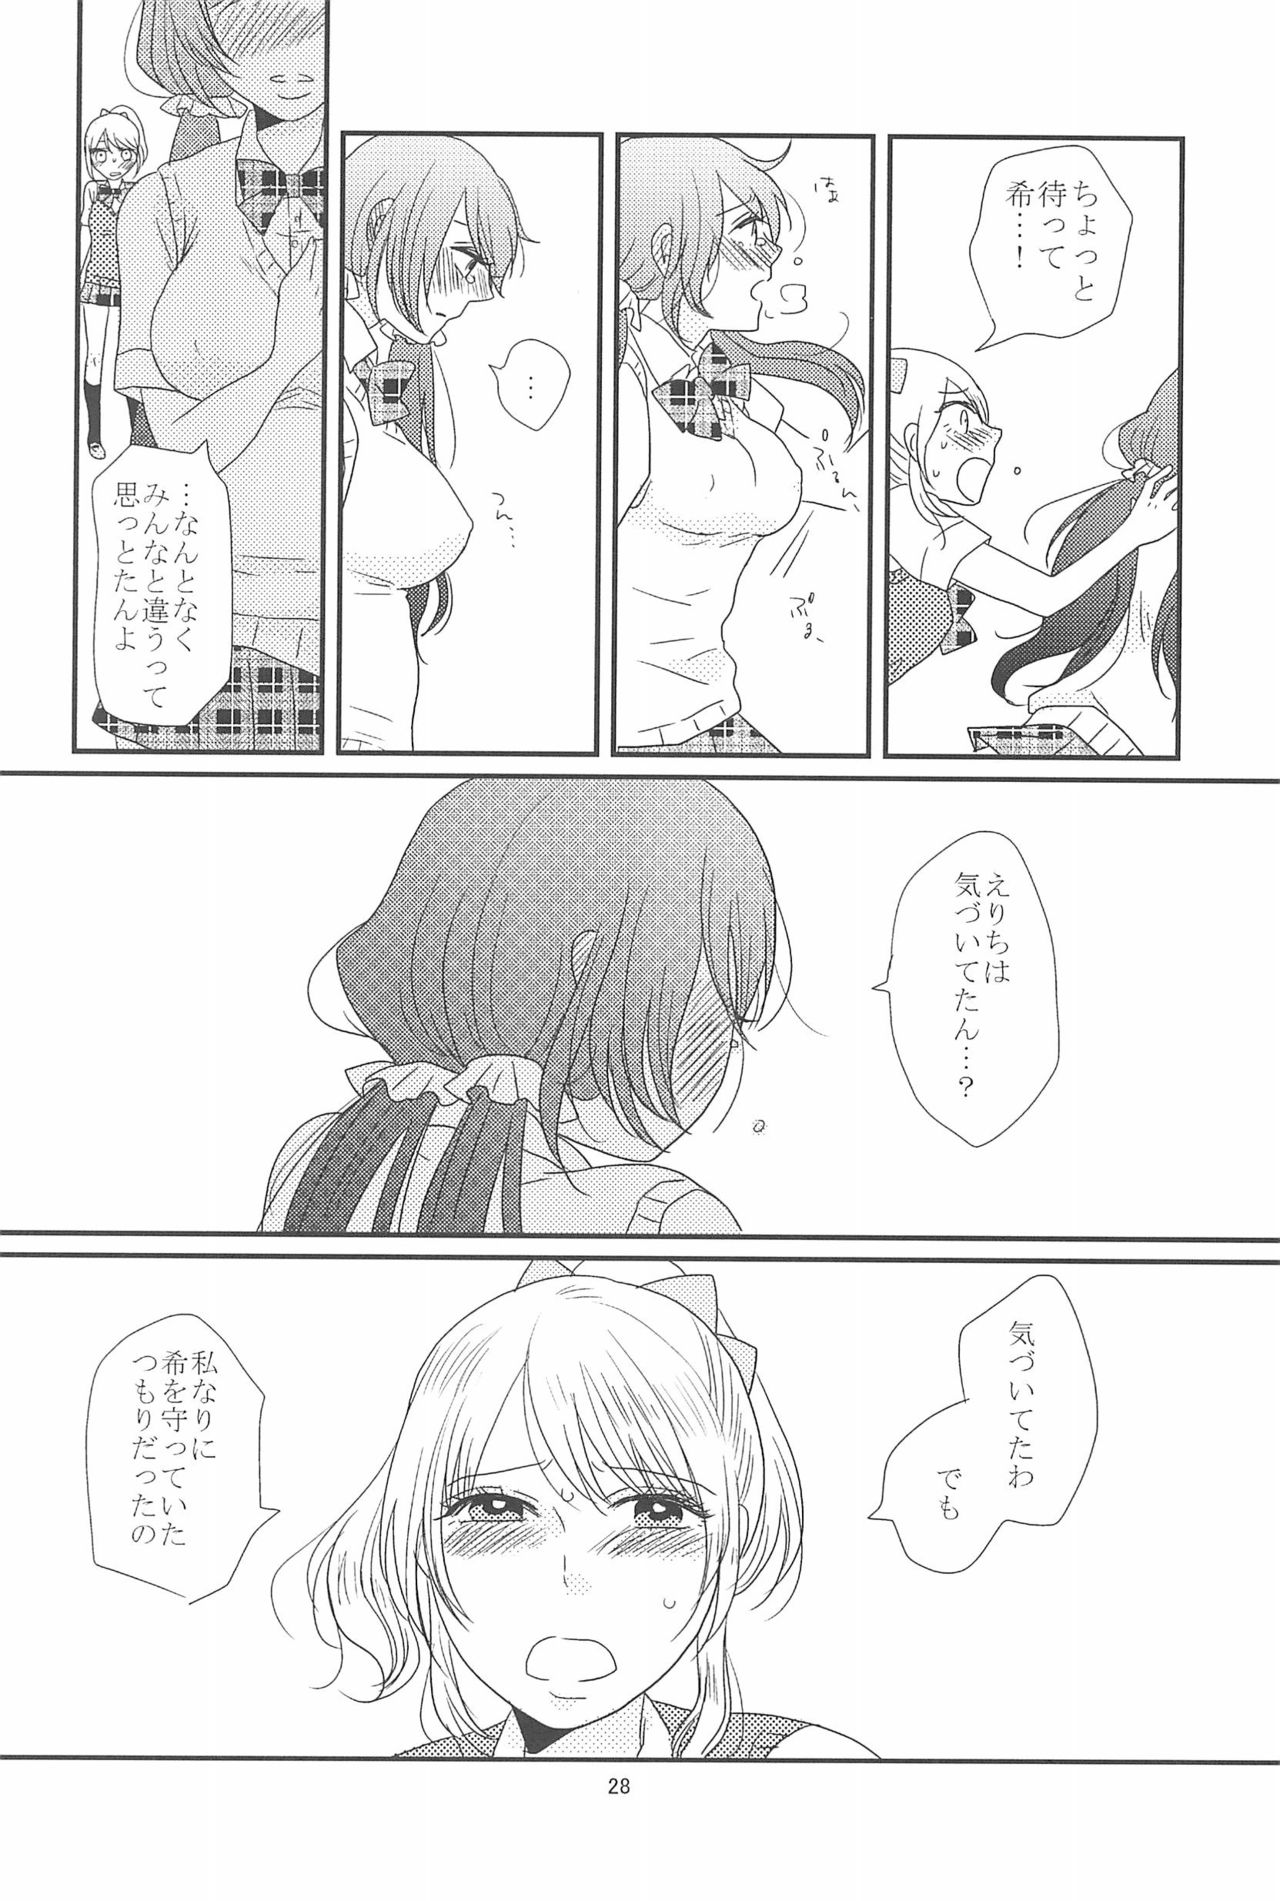 (C90) [BK*N2 (Mikawa Miso)] HAPPY GO LUCKY DAYS (Love Live!) page 32 full